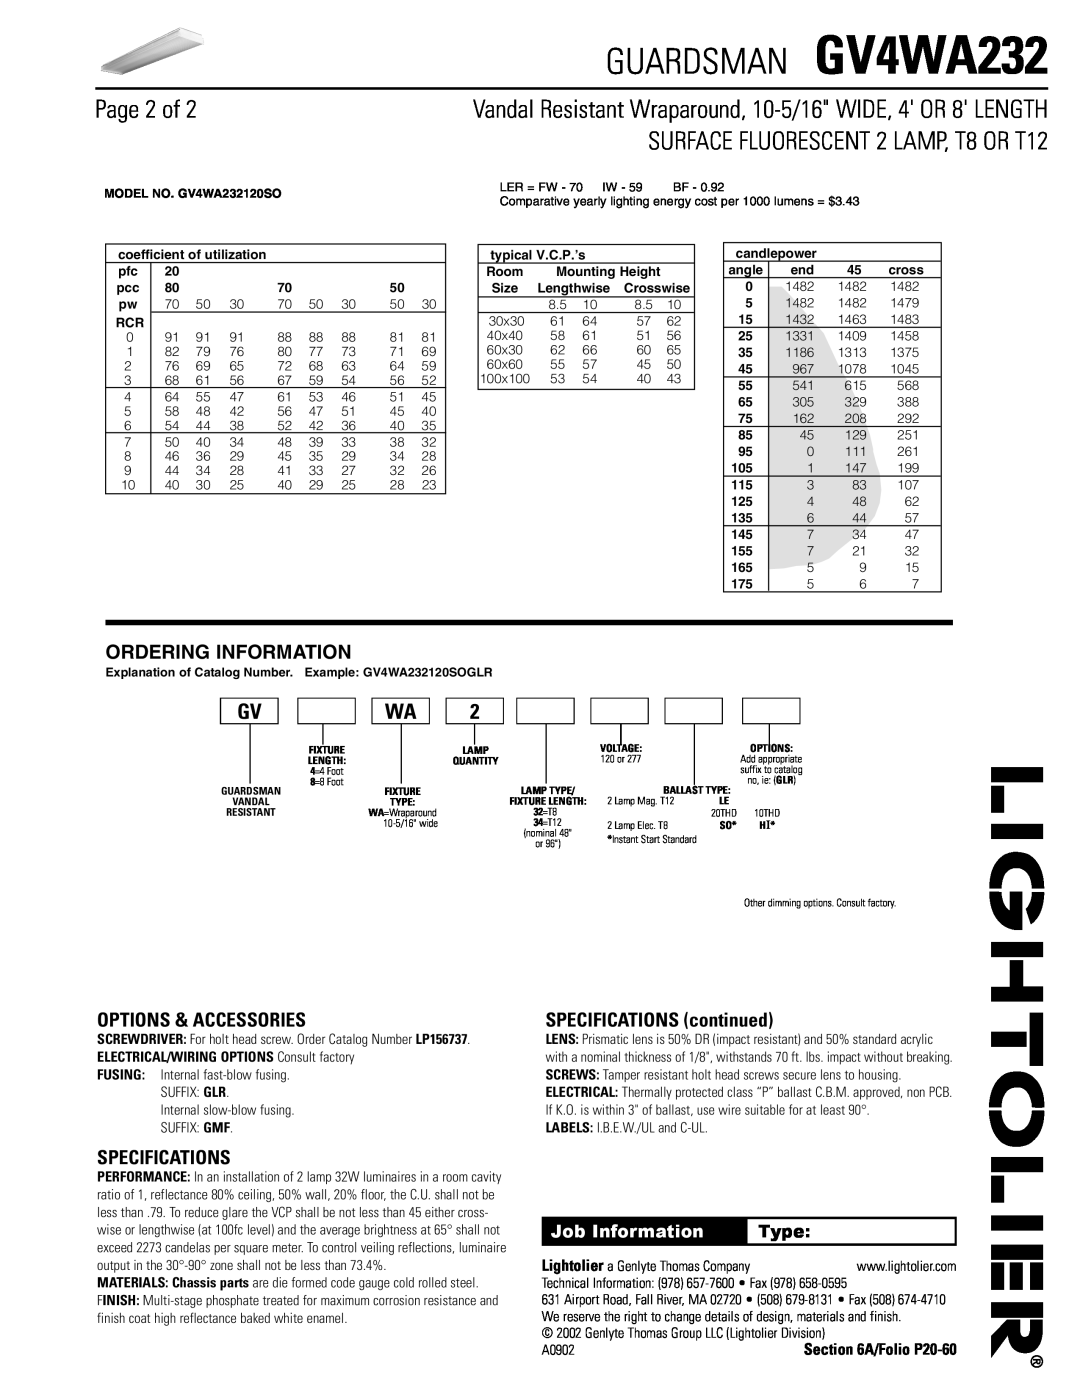 Lightolier GV4WA232 Page 2 of, SURFACE FLUORESCENT 2 LAMP, T8 OR T12, Ordering Information, Options & Accessories, Type 